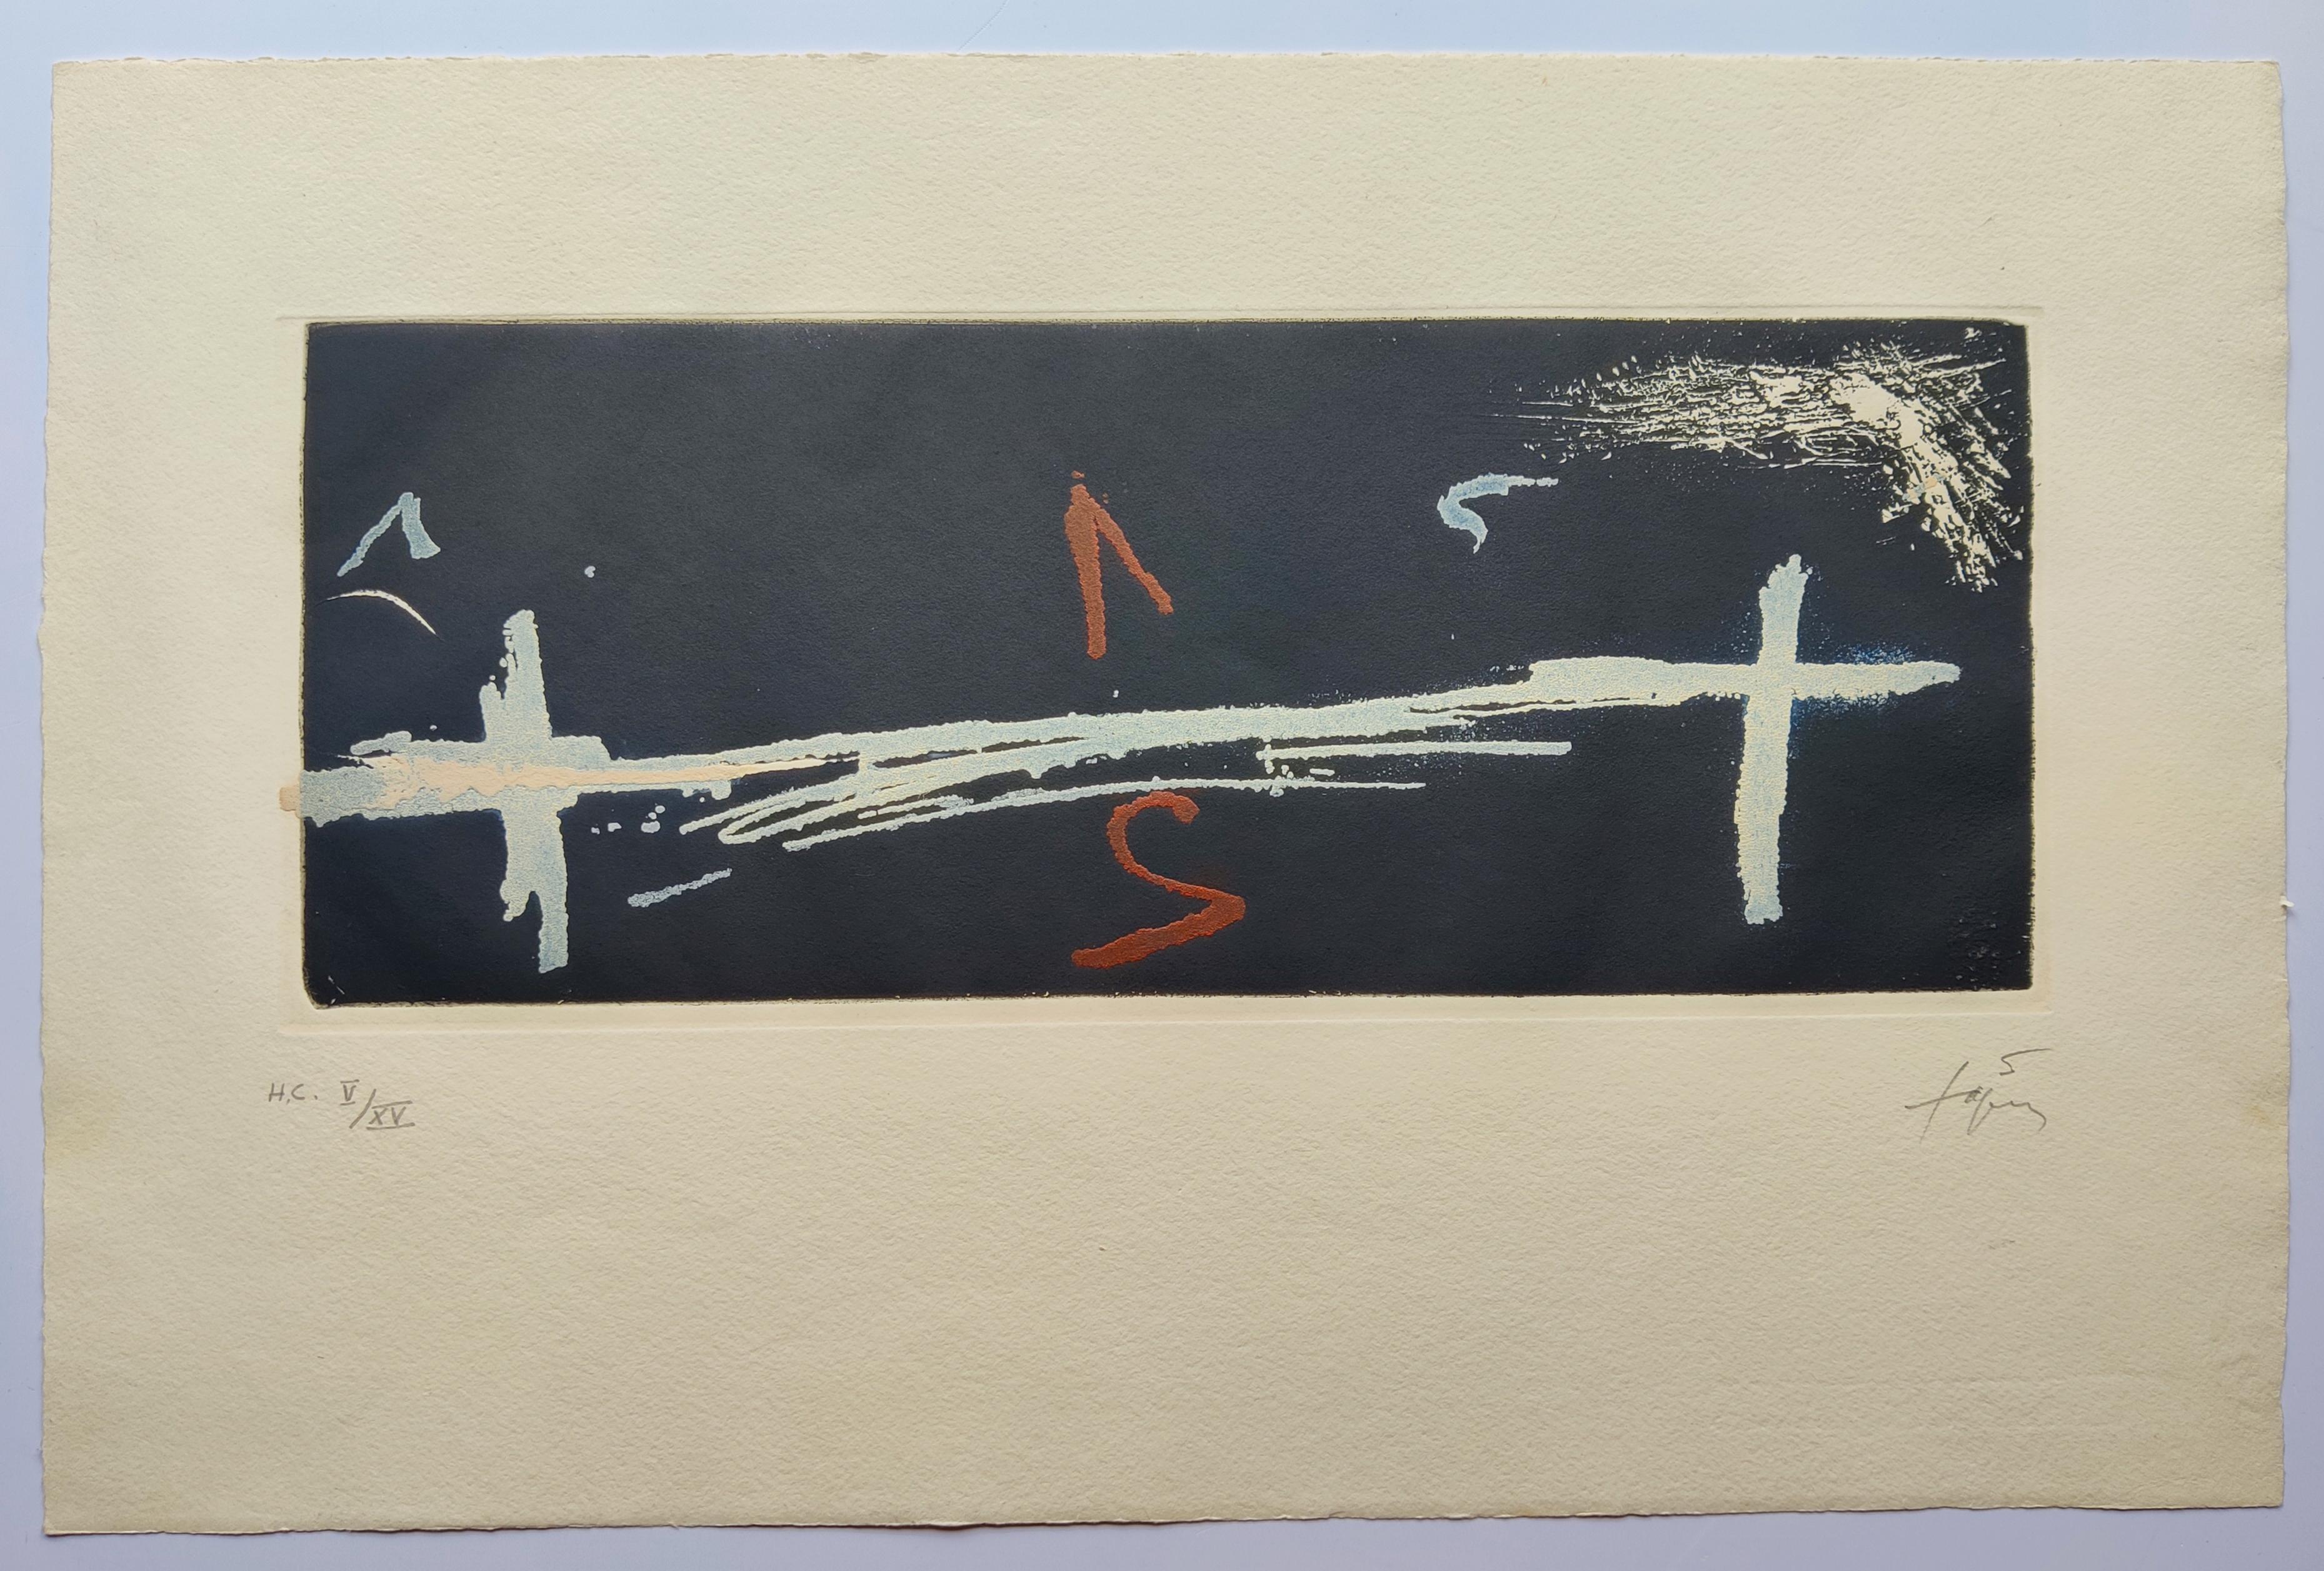 Antoni TAPIES 
Double croix, 1976
Lithographic 
Edition H.C. V/XV low left
Signed low right
Sheet 33 X 51 cm
Printed by J. Barbarà, Barcelona
Published by Maeght Gallery, Barcelona
Literature: Galfetti 569